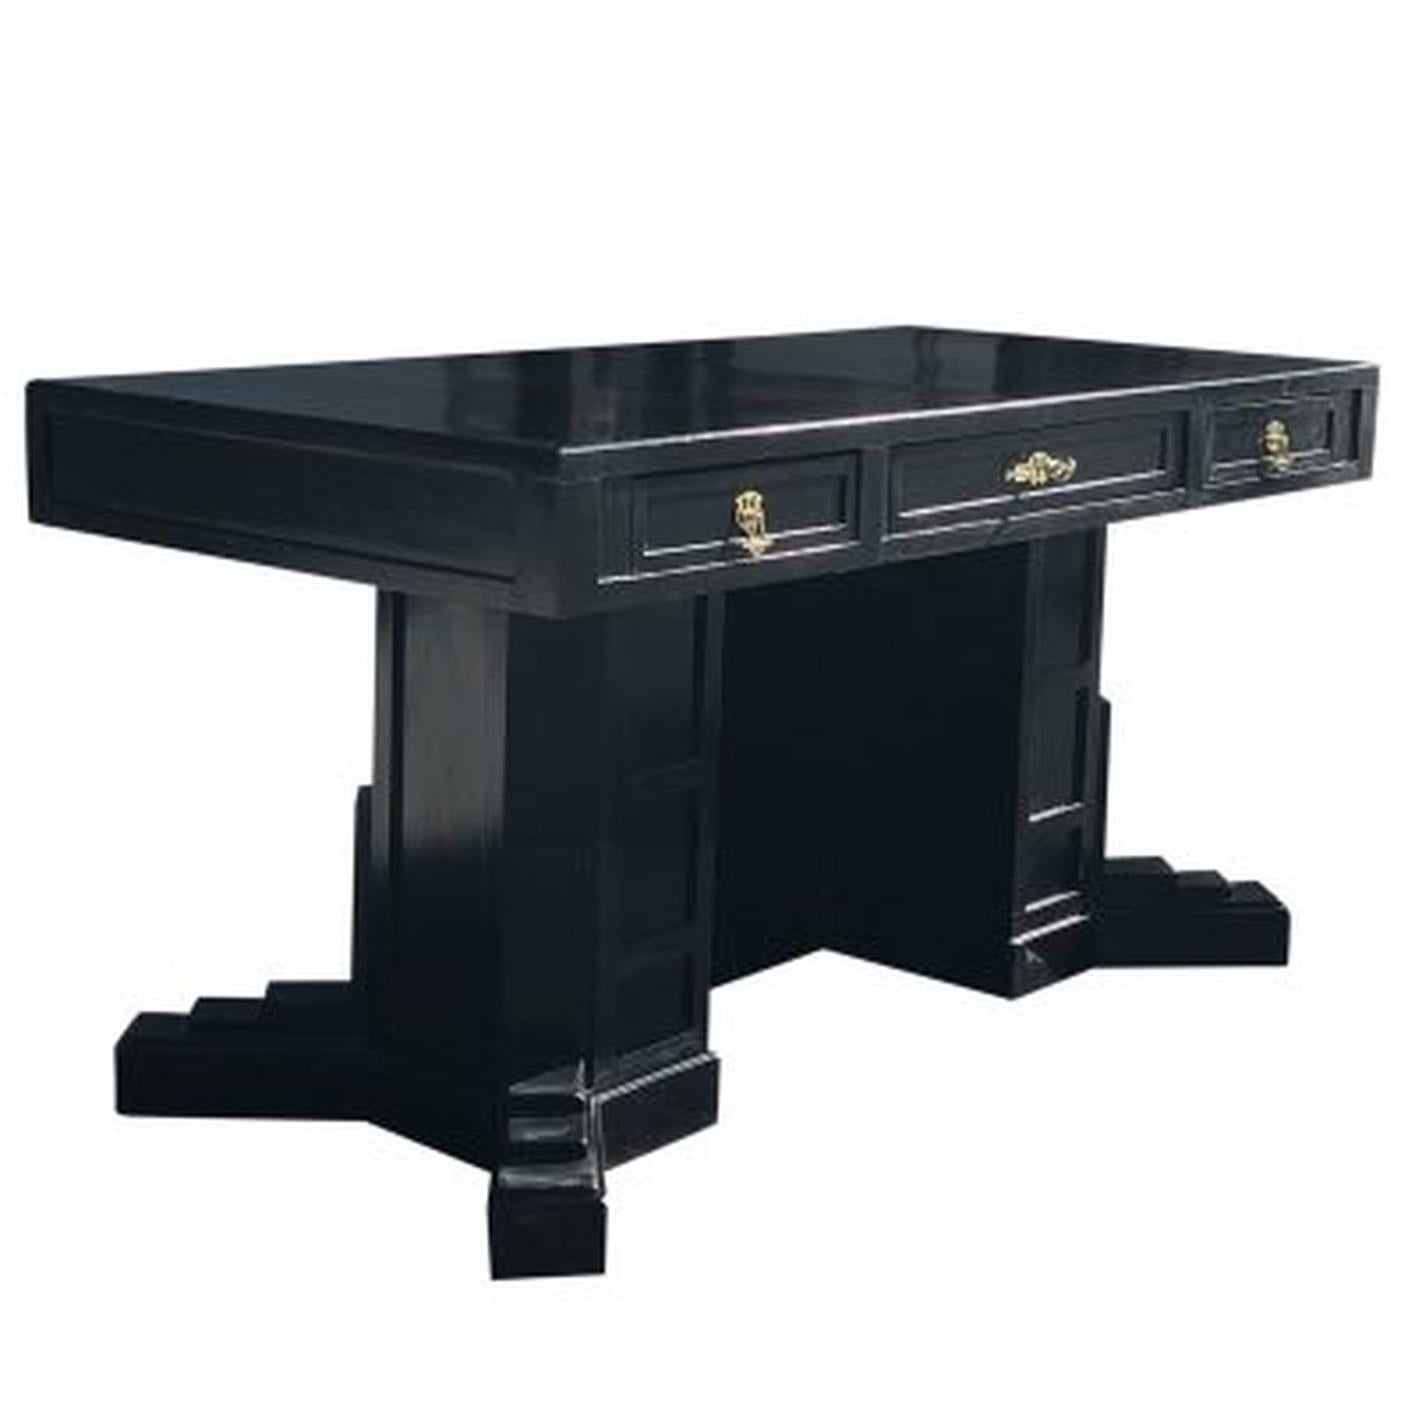 A vintage Art Deco Austrian ebonized freestanding writing desk with three drawers in good condition with its original brass hardware, produced by Wiener Werkstätte. Wear consistent with age and use, circa 1910-1930, Vienna, Austria.

The Wiener